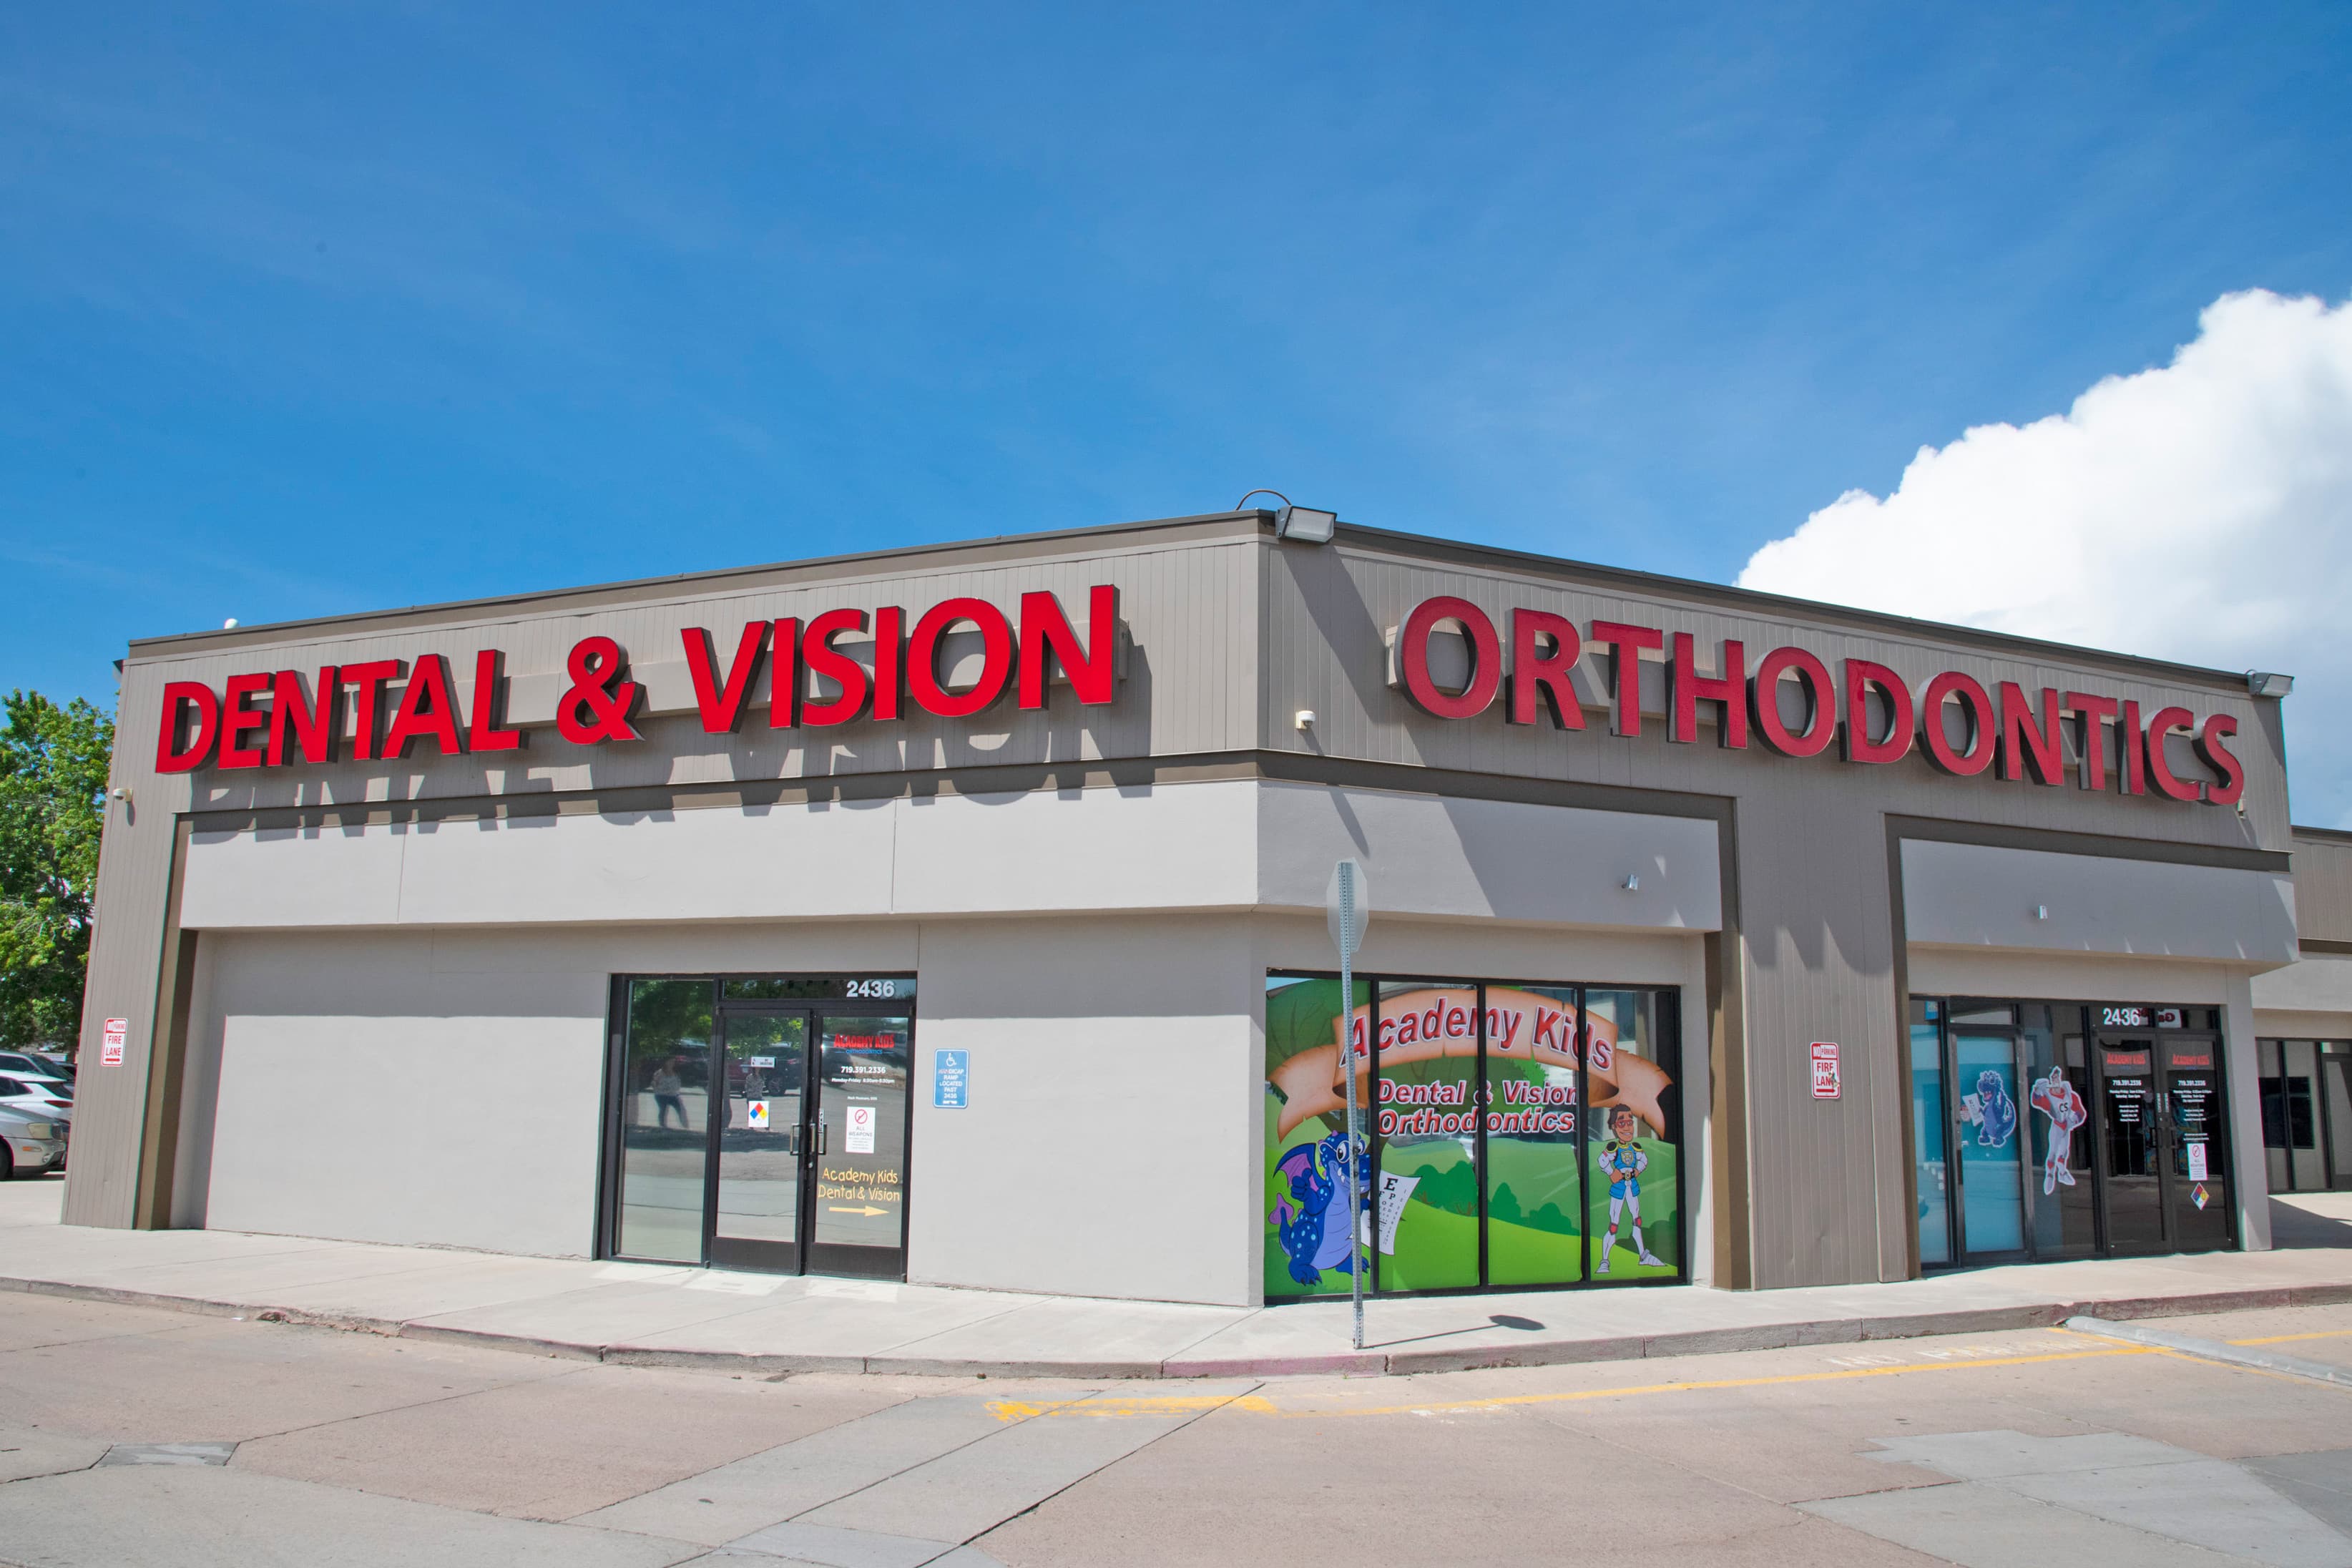 building exterior with with a sign that says dental, vision and orthodontics in red letters